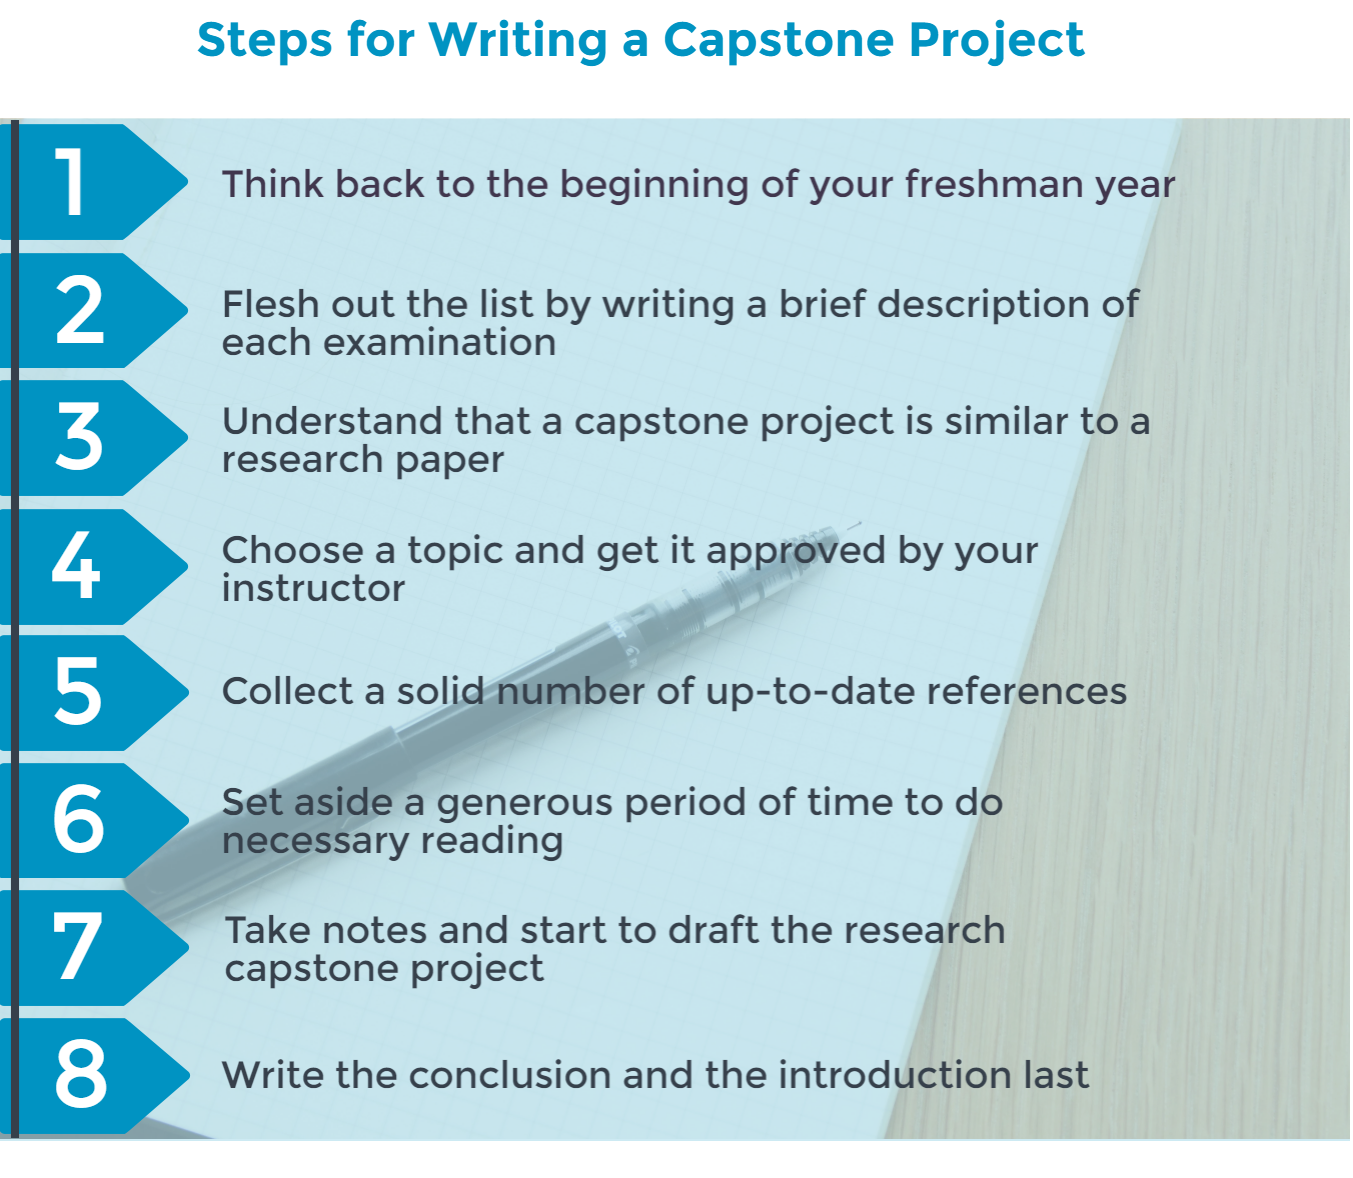 examples of capstone project papers